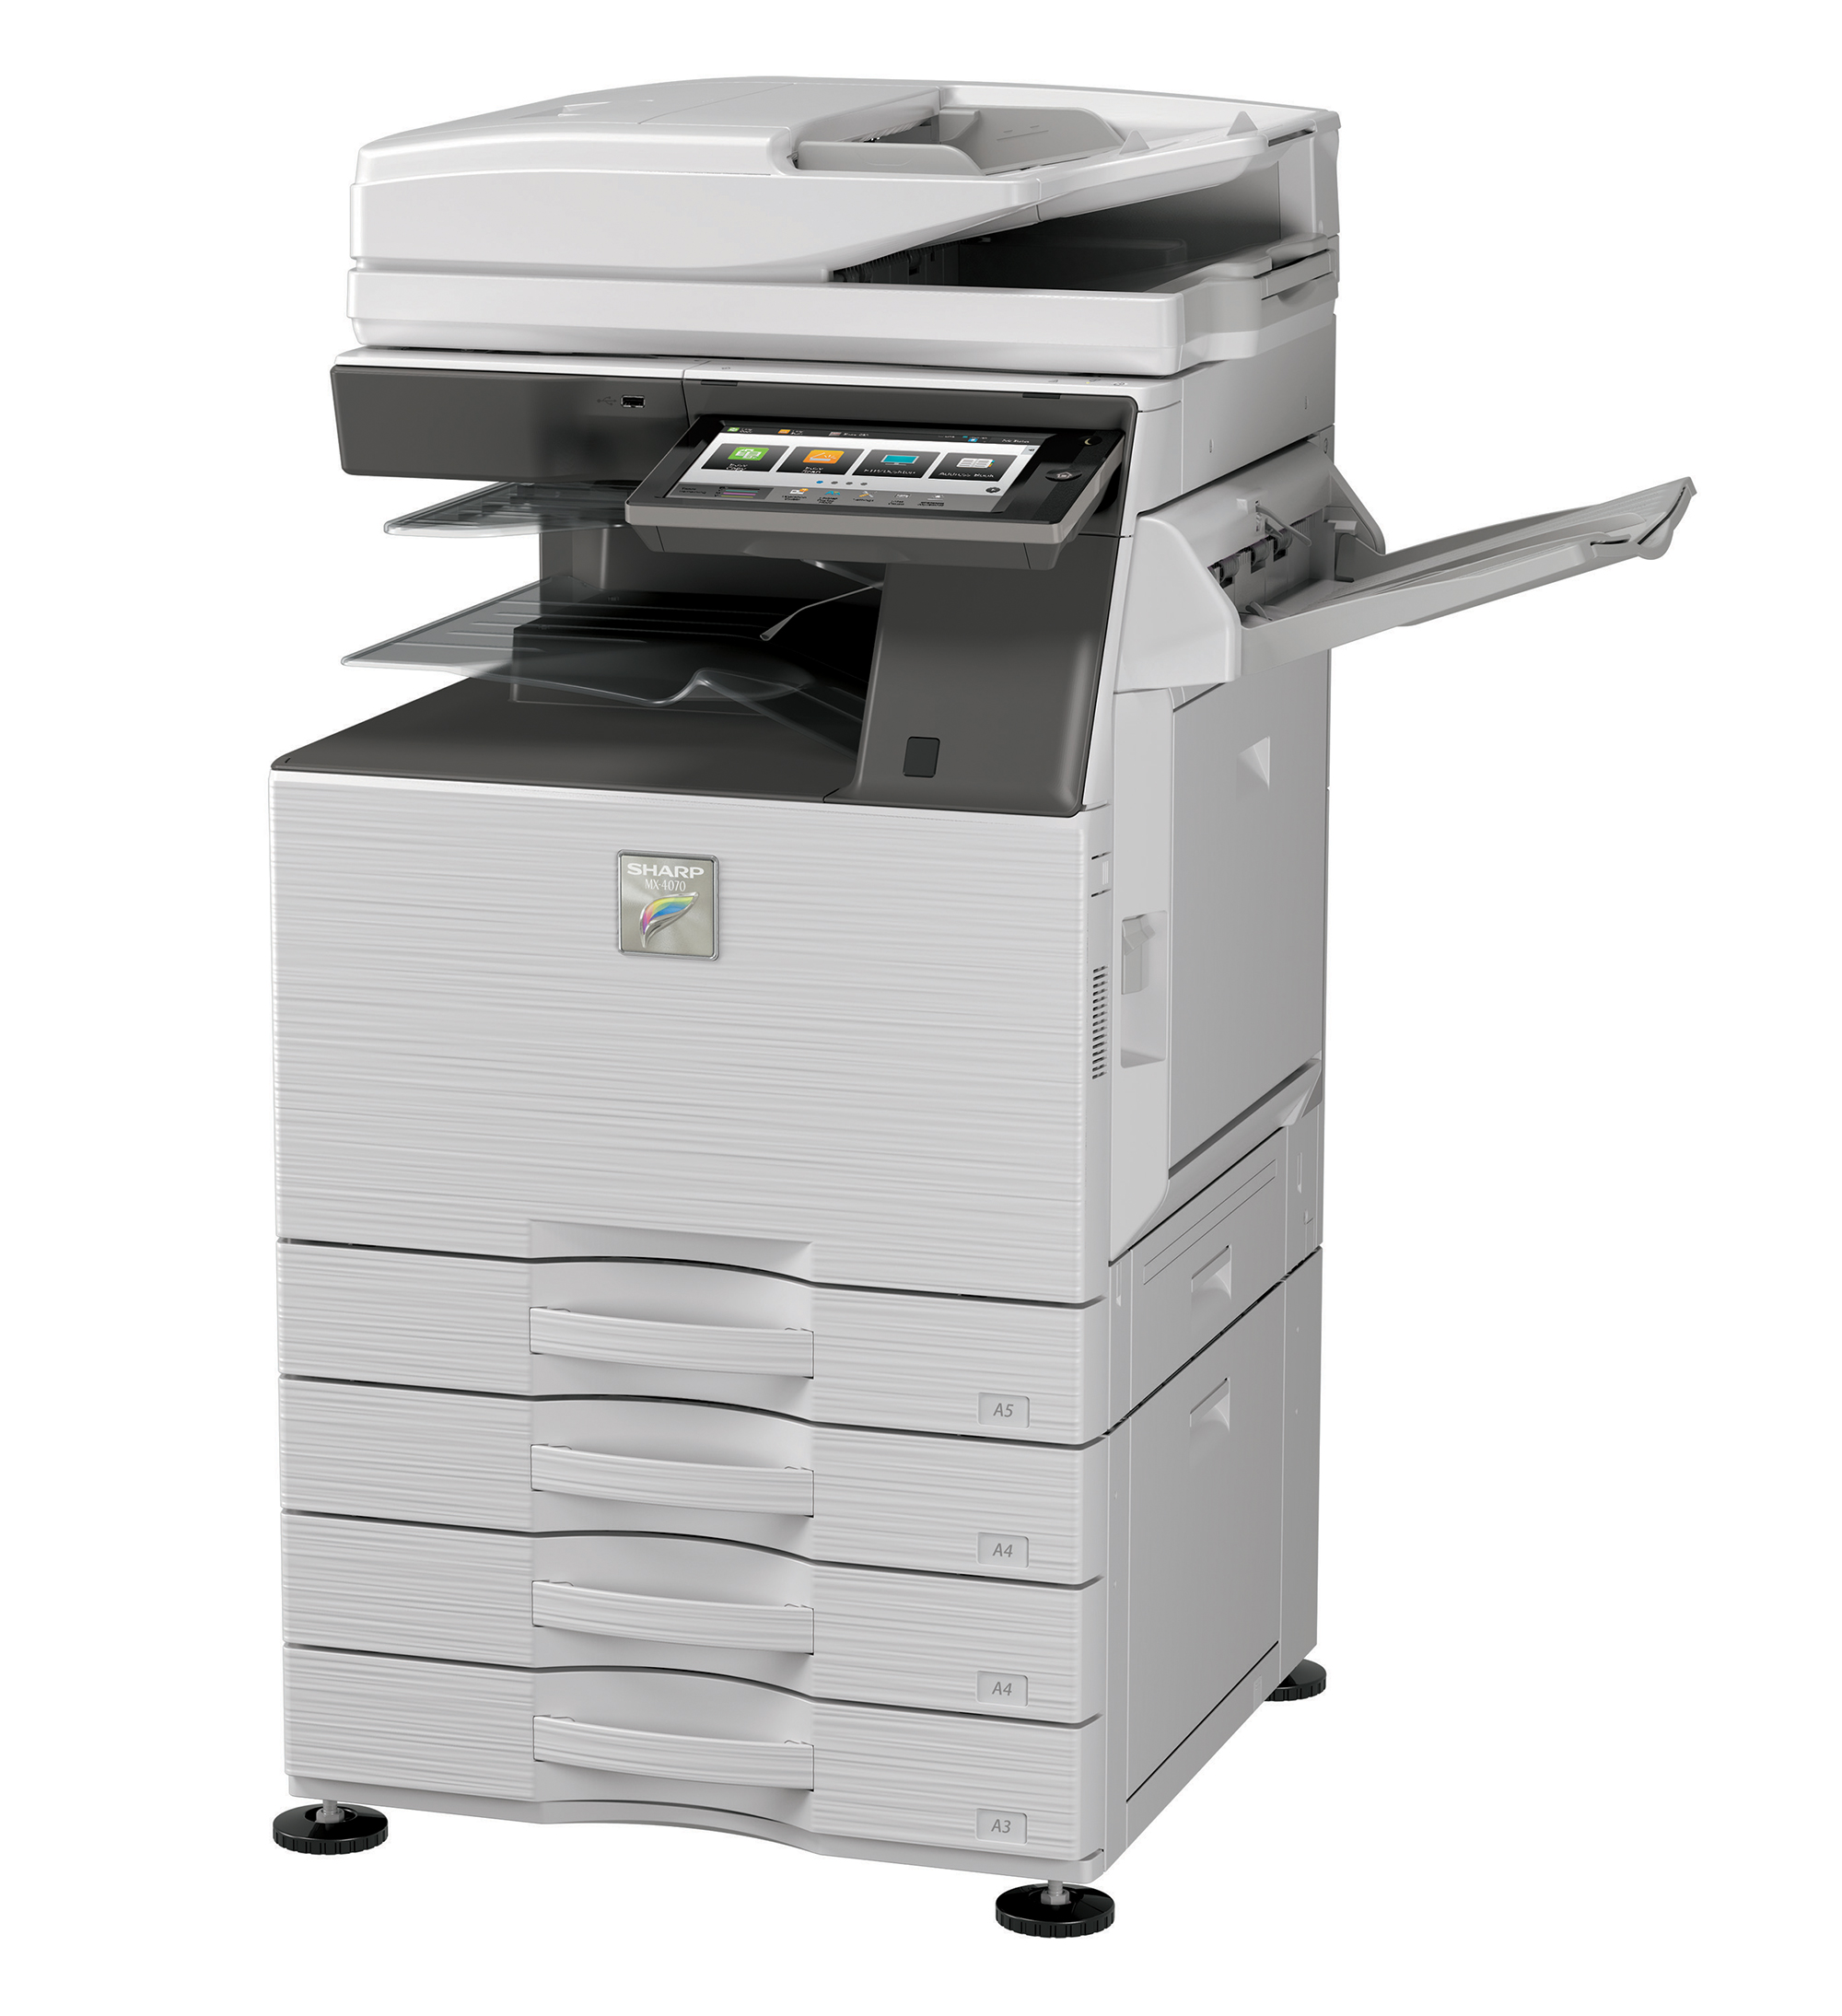 MX-3071N Color MFP (Scan Centric – Advanced Series)